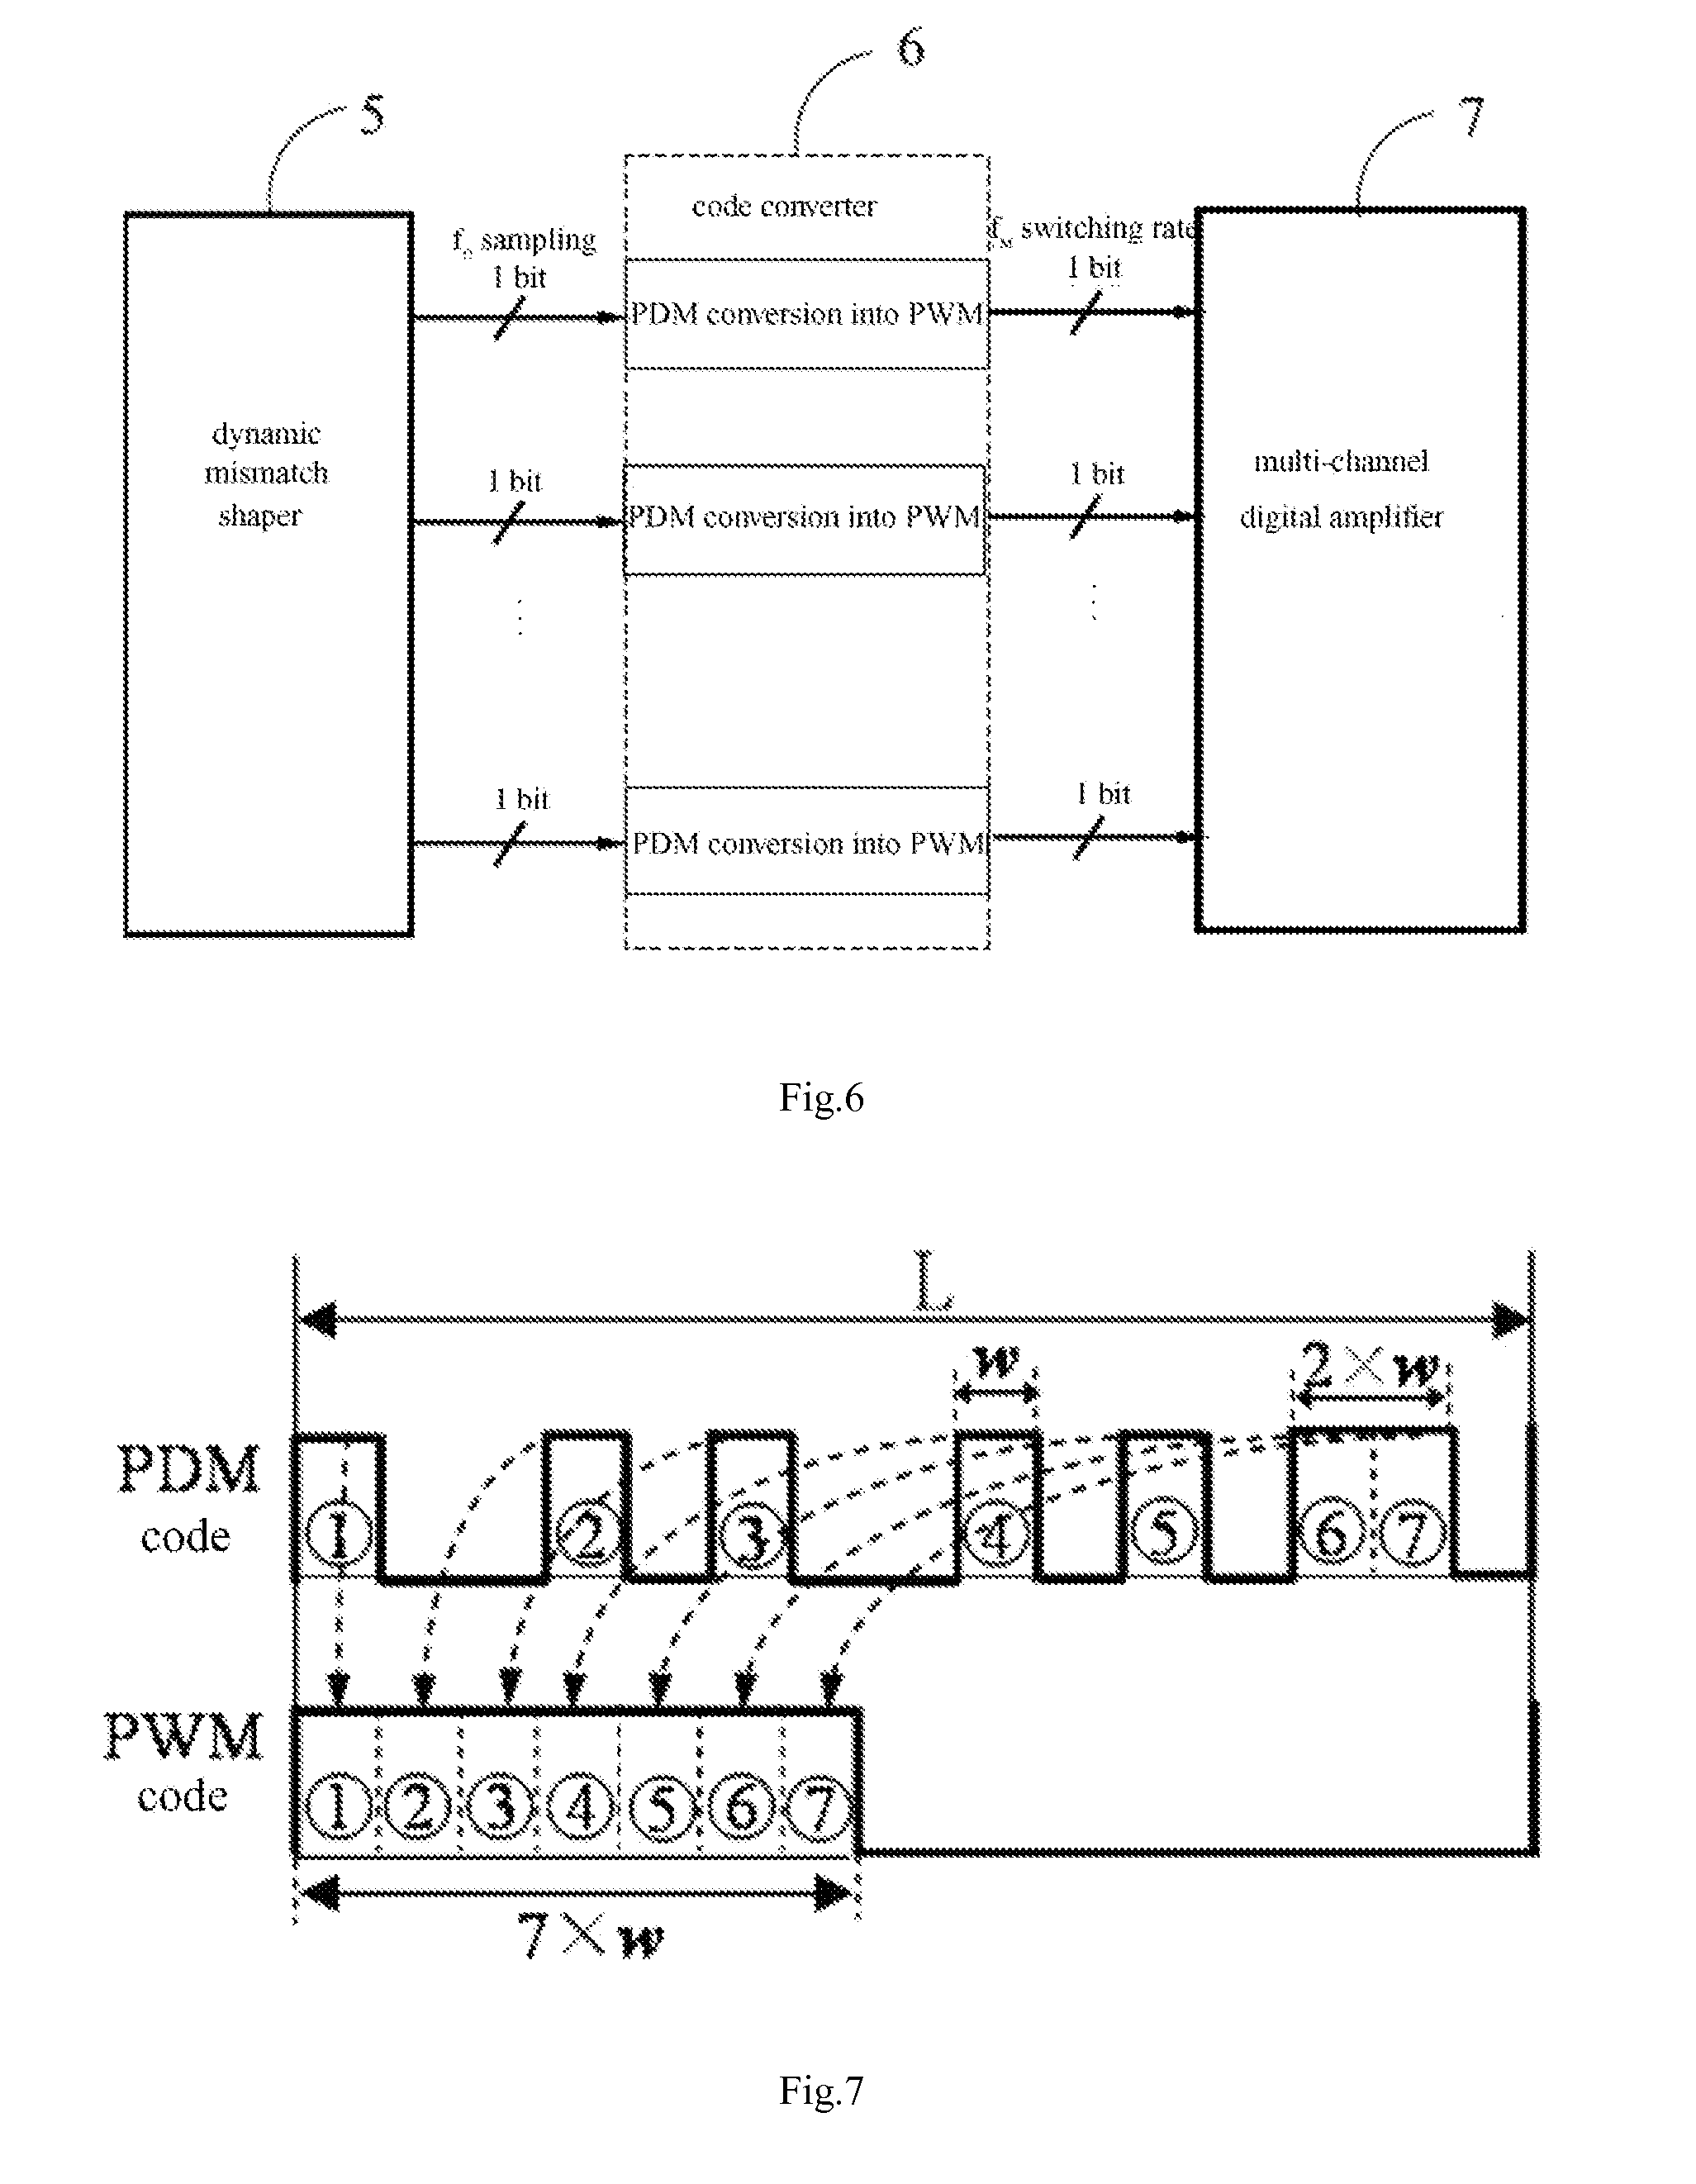 Method and Device for Driving Digital Speaker Based on Code Conversion